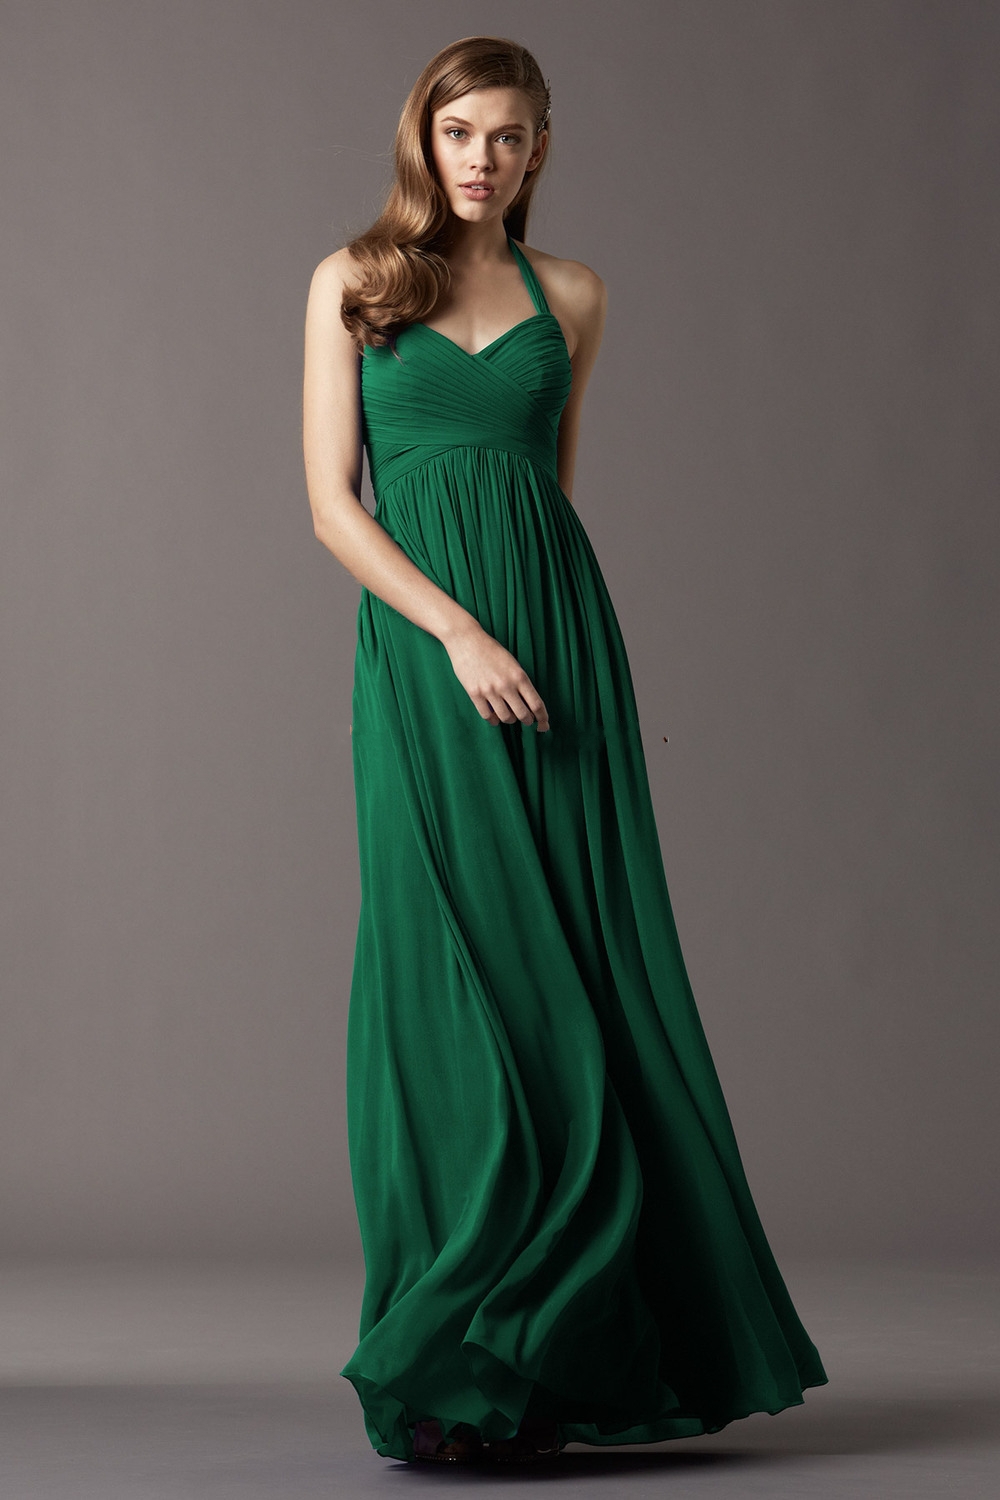 Emerald Green Bridesmaid Dress for Promotional Emerald